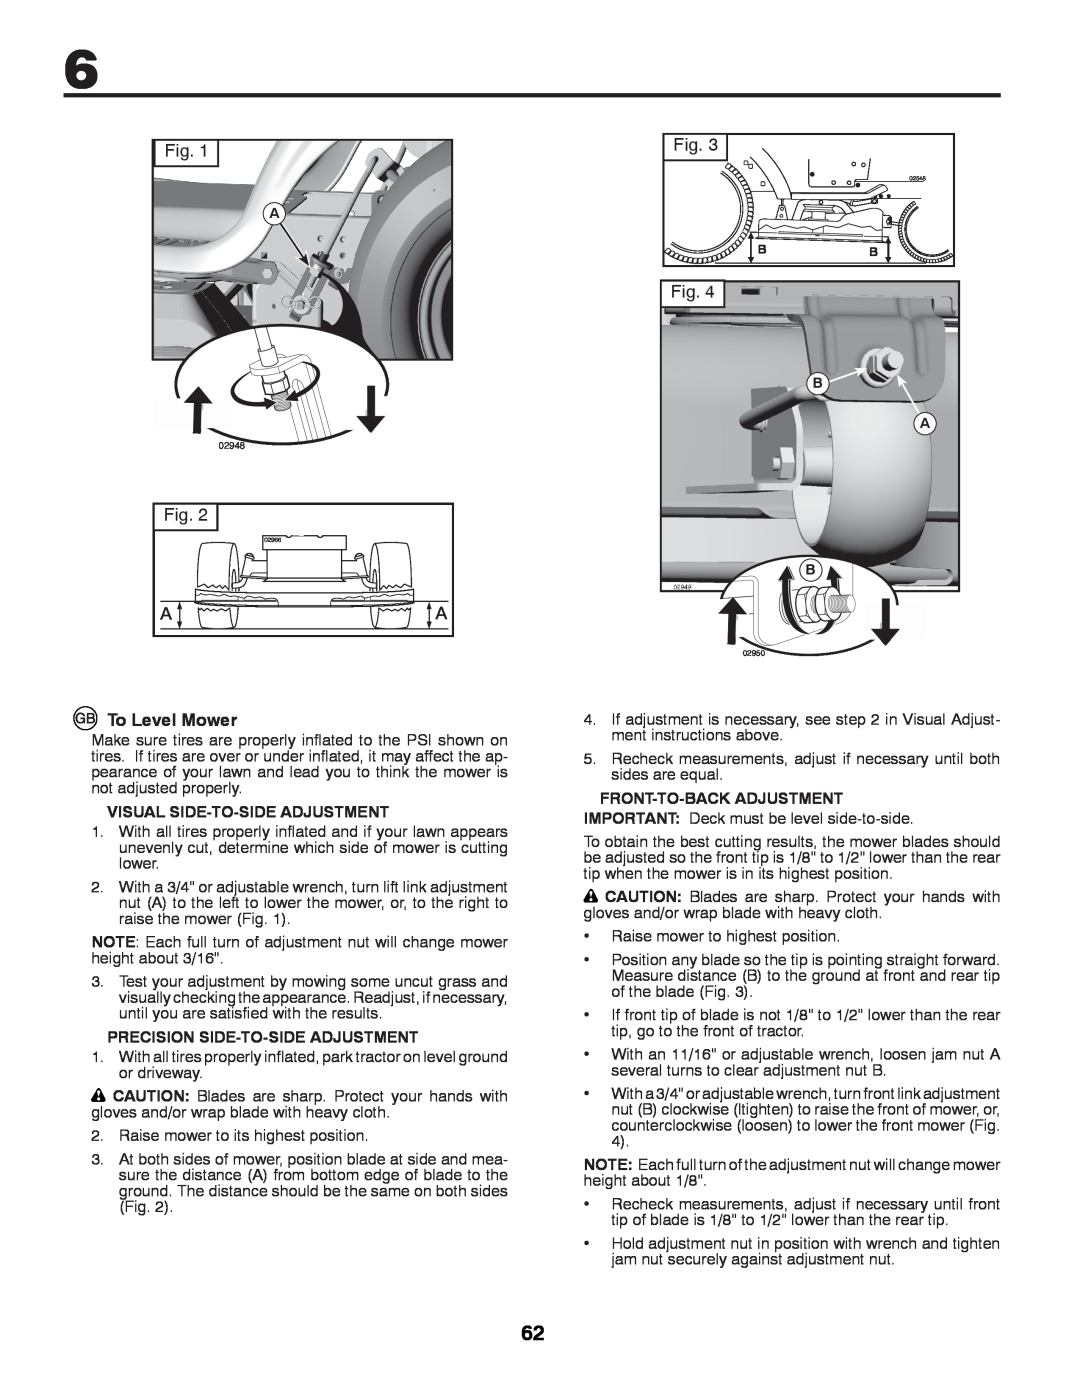 McCulloch 532 43 37-12 Rev. 1 instruction manual Fig, To Level Mower 